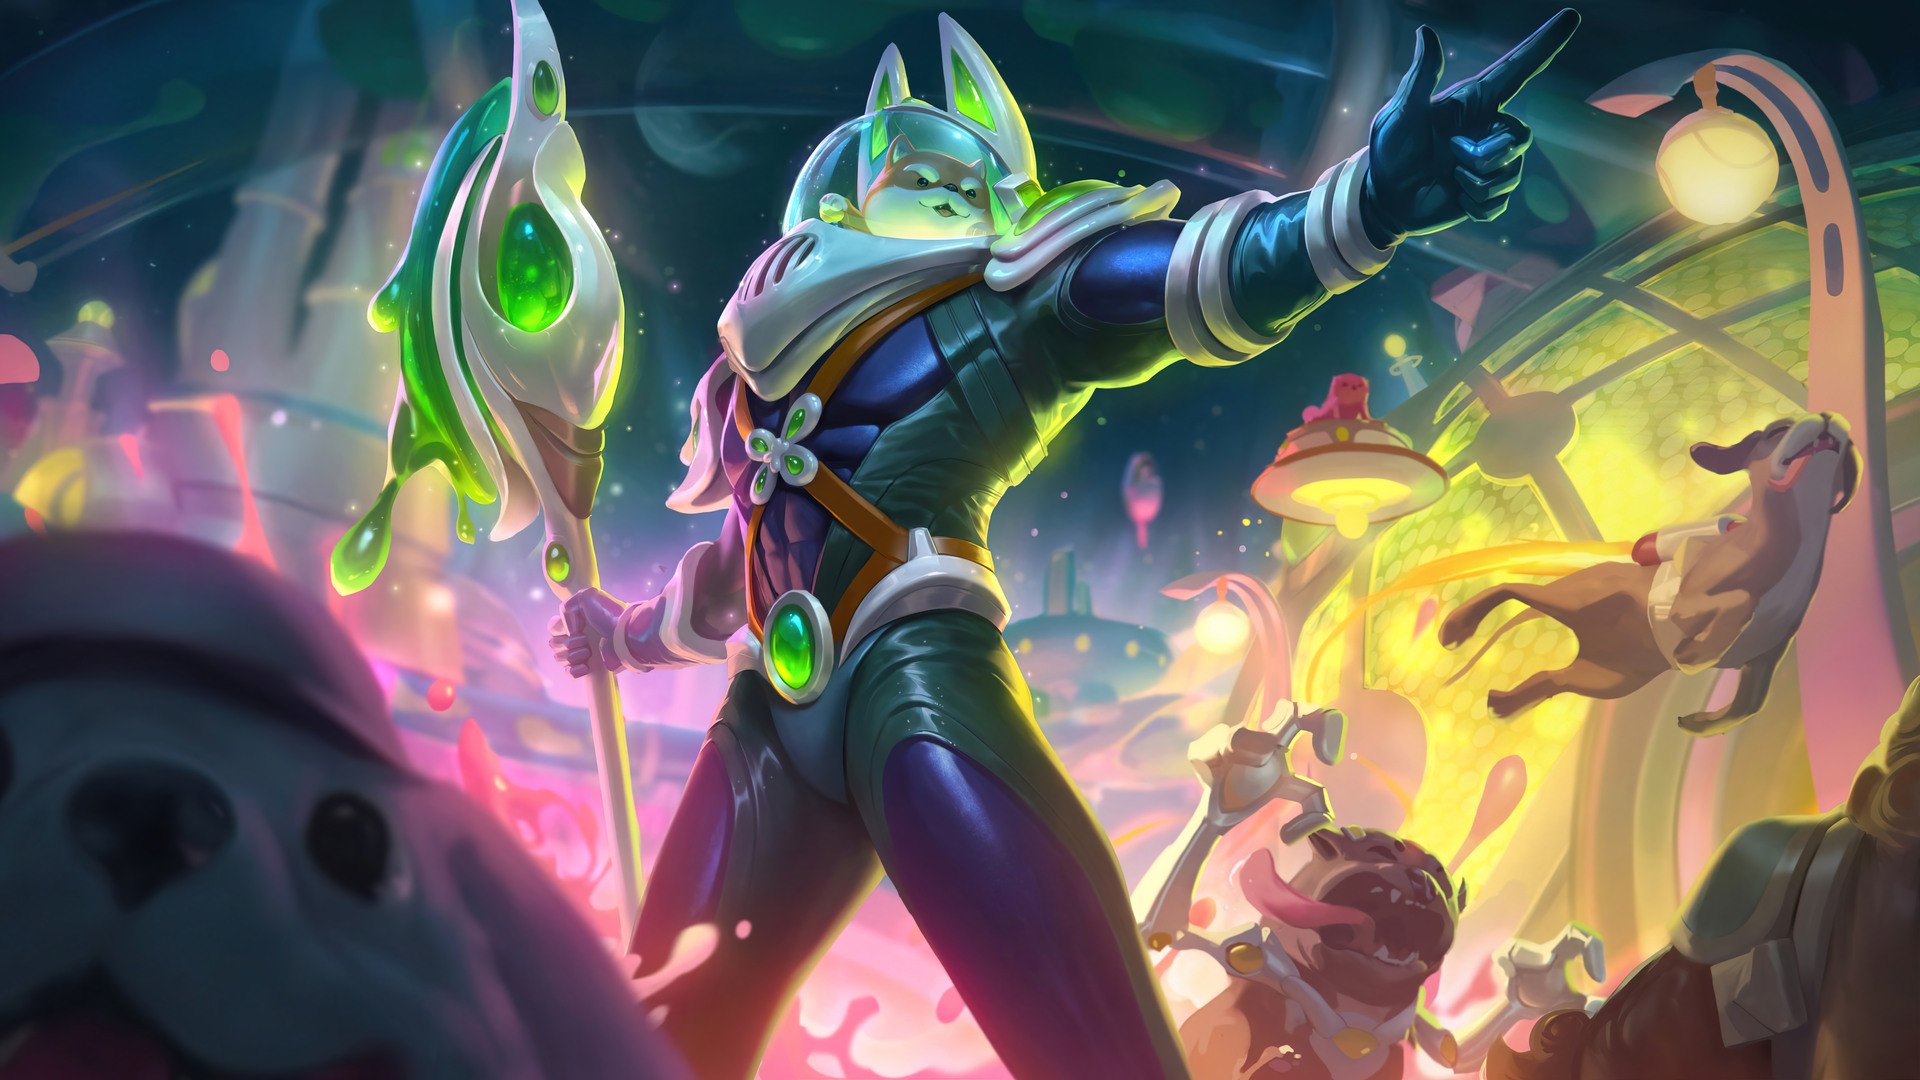 League of Legends Your Shop is Back - Date, Schedule and Skins